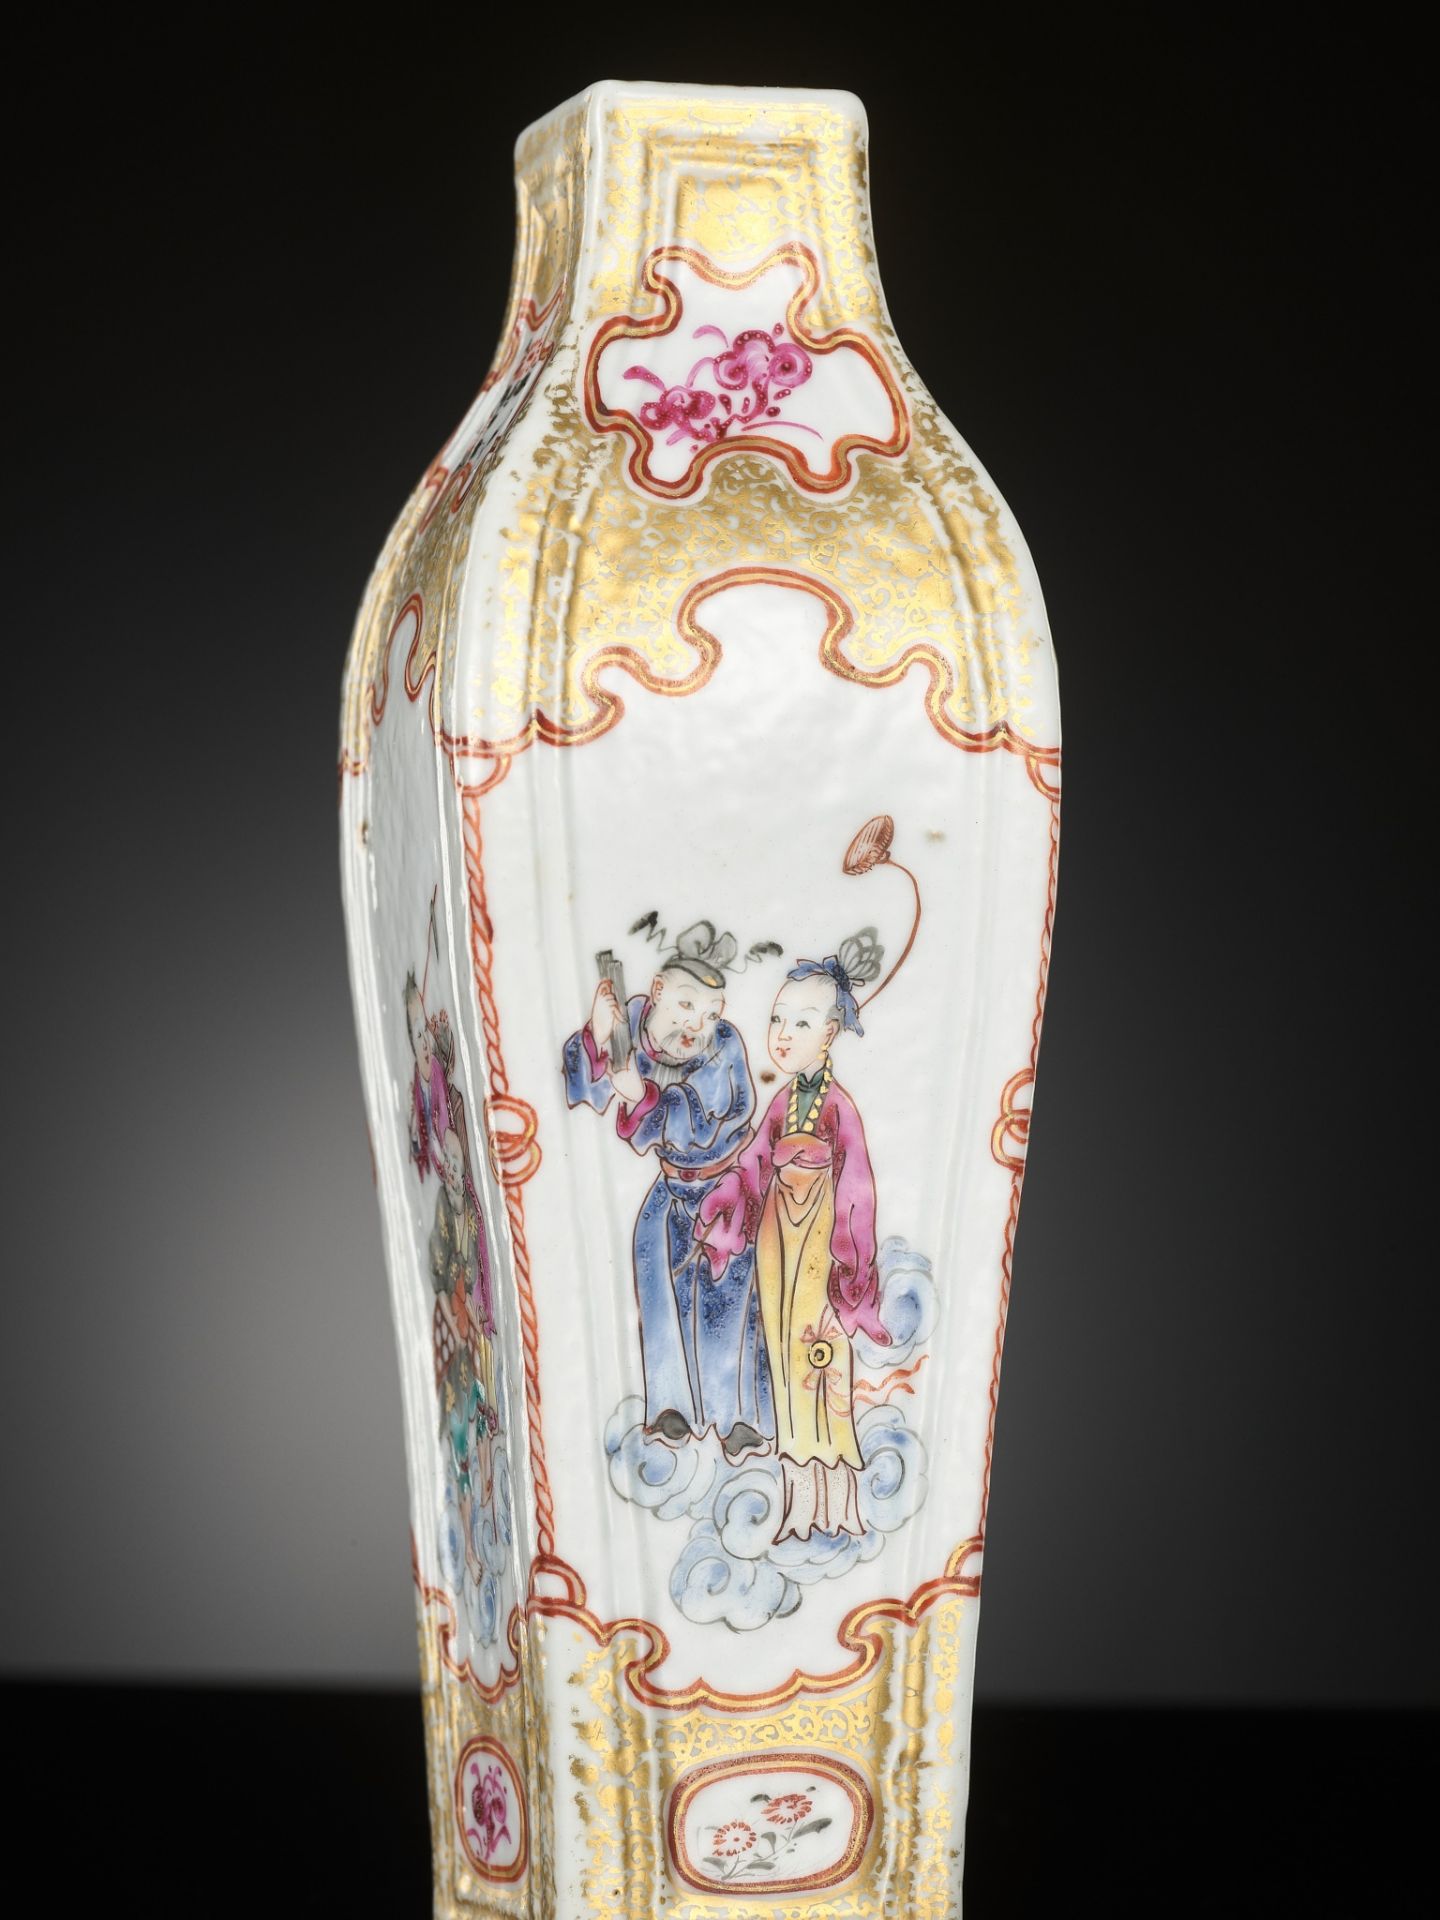 A GILT FAMILLE ROSE VASE DEPICTING THE EIGHT IMMORTALS, BAXIAN, QIANLONG PERIOD